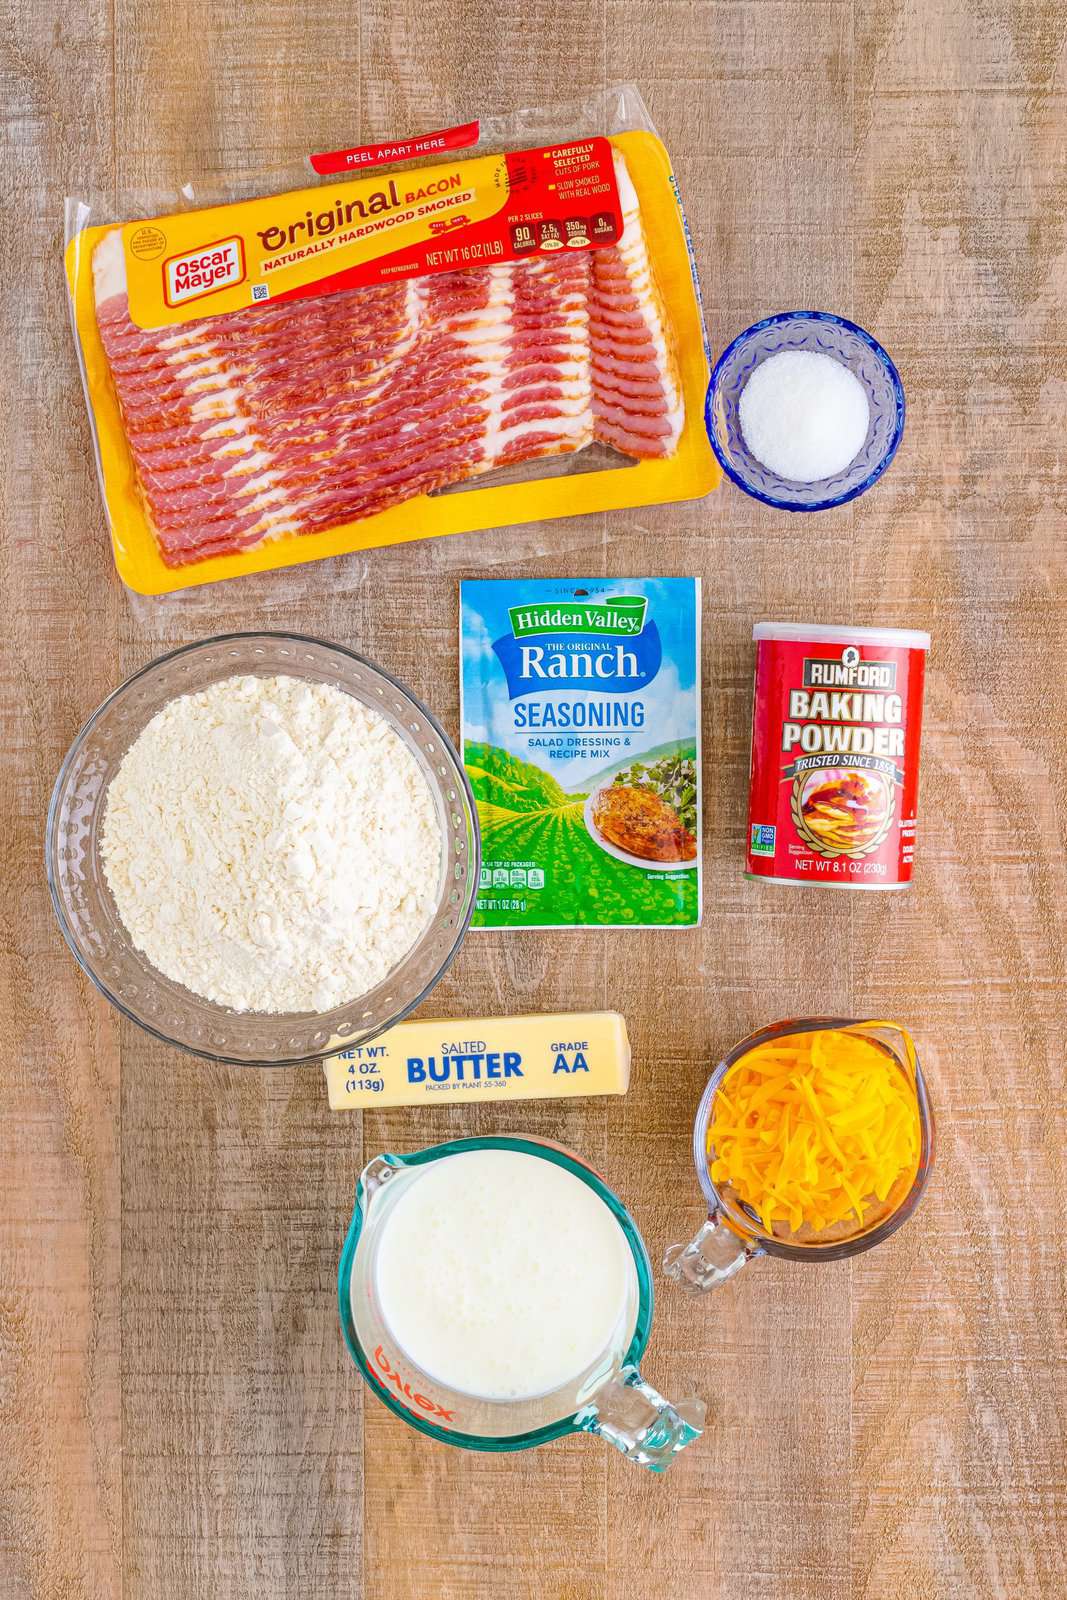 Salted butter,
all-purpose flour,
granulated sugar,
aluminum-free, baking powder,
dried ranch seasoning, buttermilk, bacon, and freshly shredded cheddar cheese.